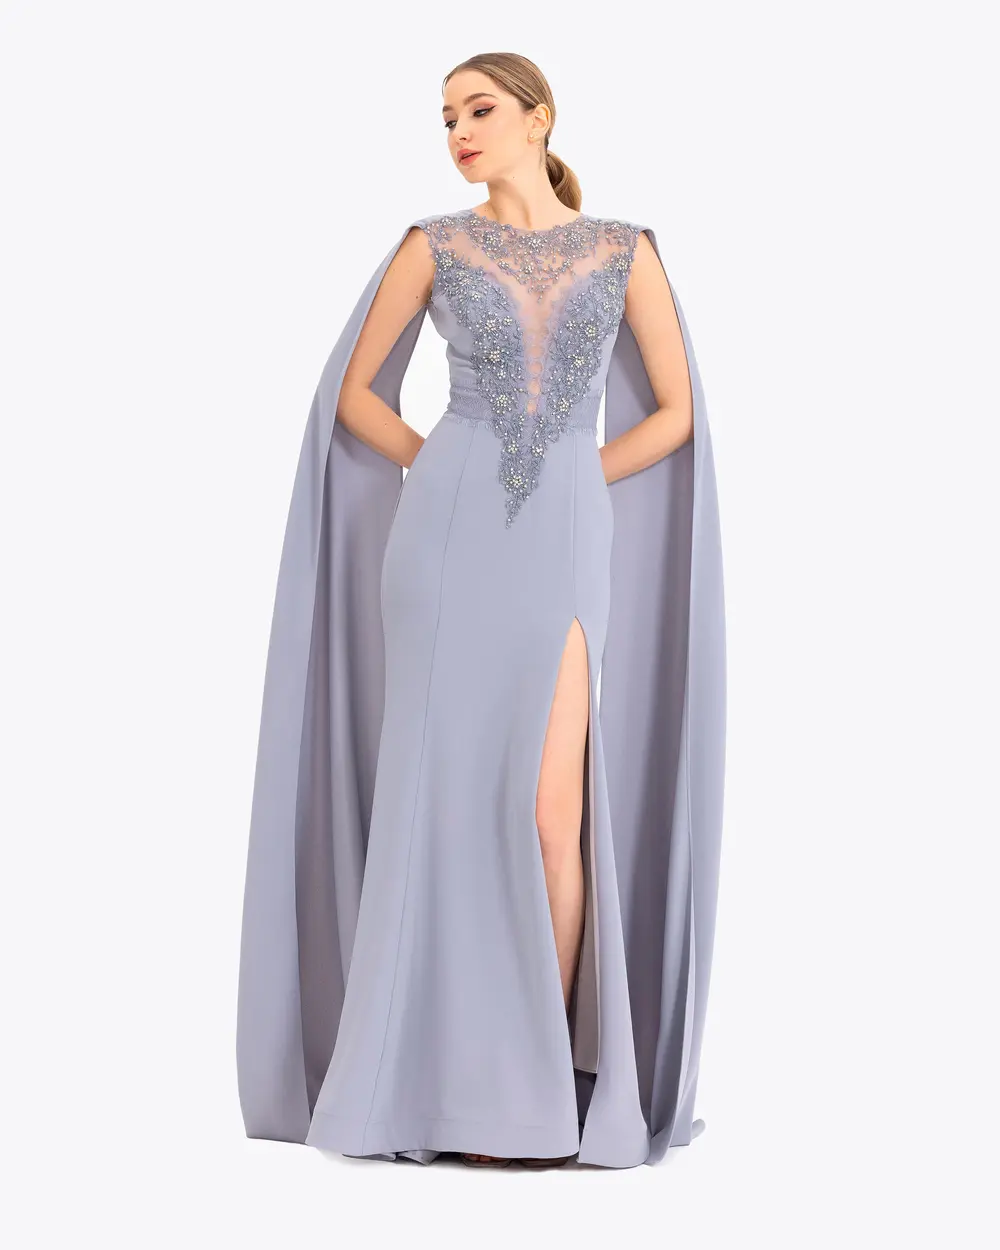 Crepe Fabric Slit Evening Dress with Indian Accessories